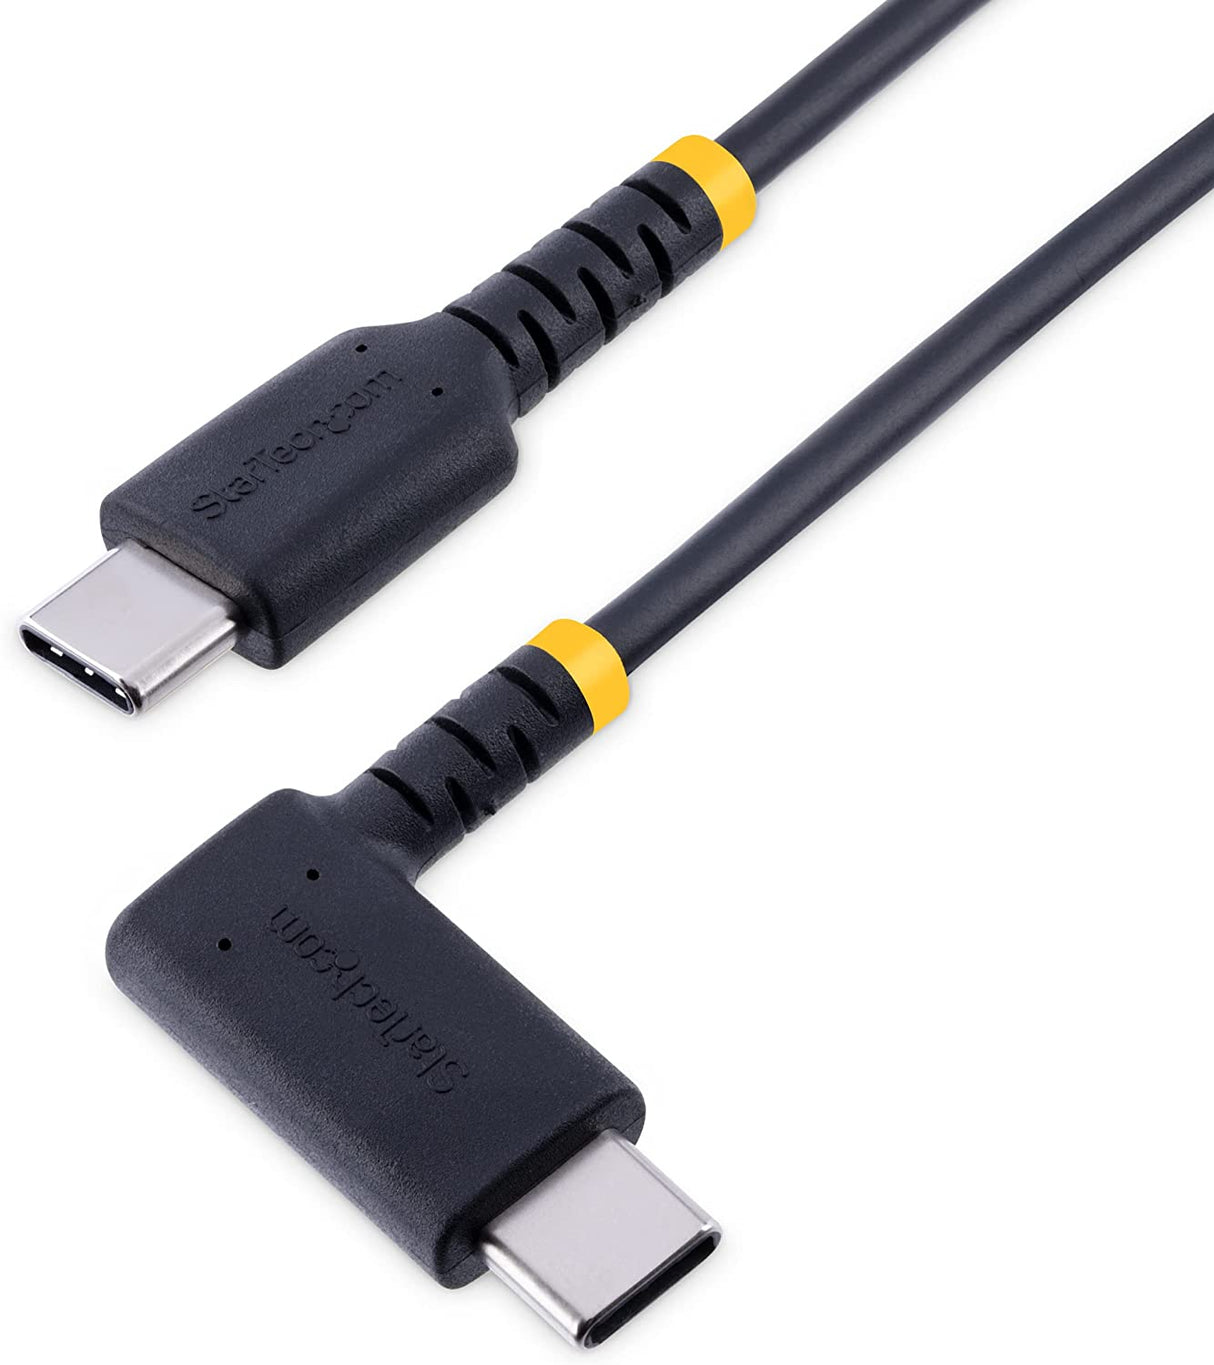 StarTech.com 3ft (1m) USB C Charging Cable Right Angle - 60W PD 3A - Heavy Duty Fast Charge USB-C Cable - USB 2.0 Type-C - Rugged Aramid Fiber - USB Charging Cord (R2CCR-1M-USB-CABLE)